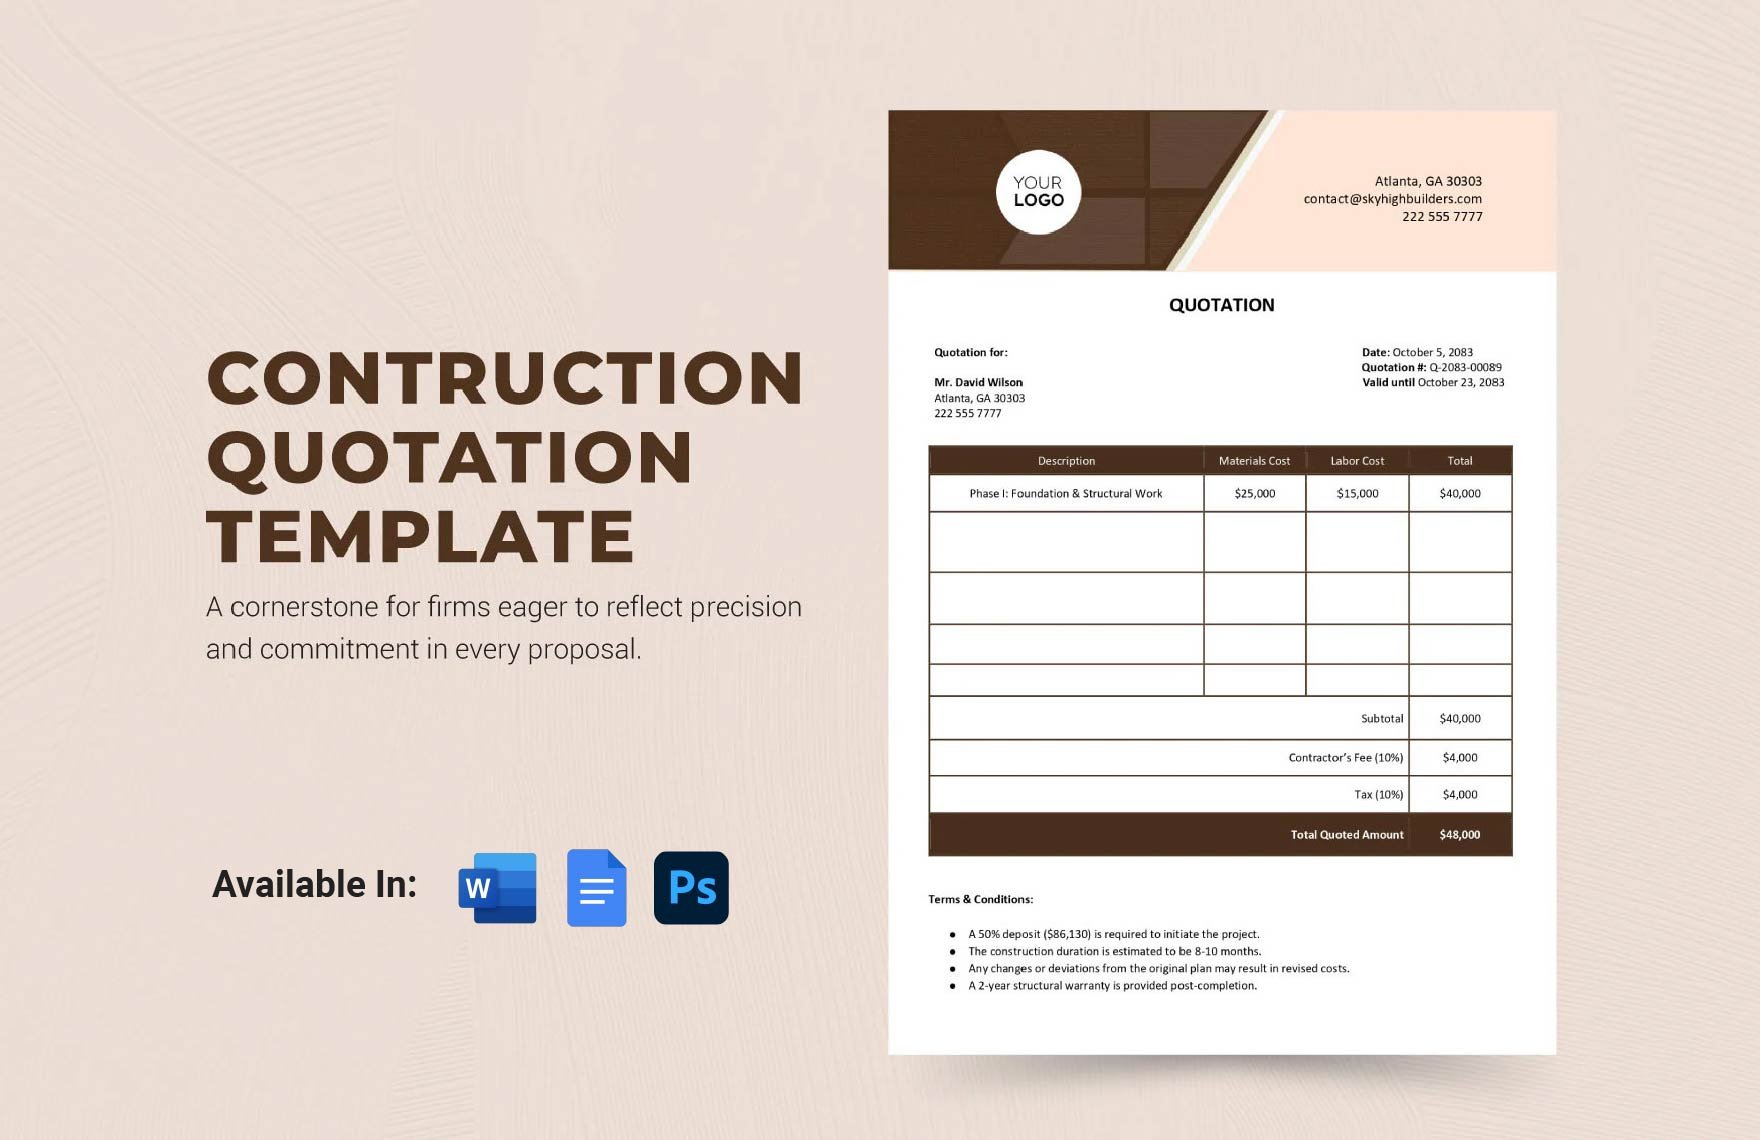 Construction Quotation Template in Word, Google Docs, PSD